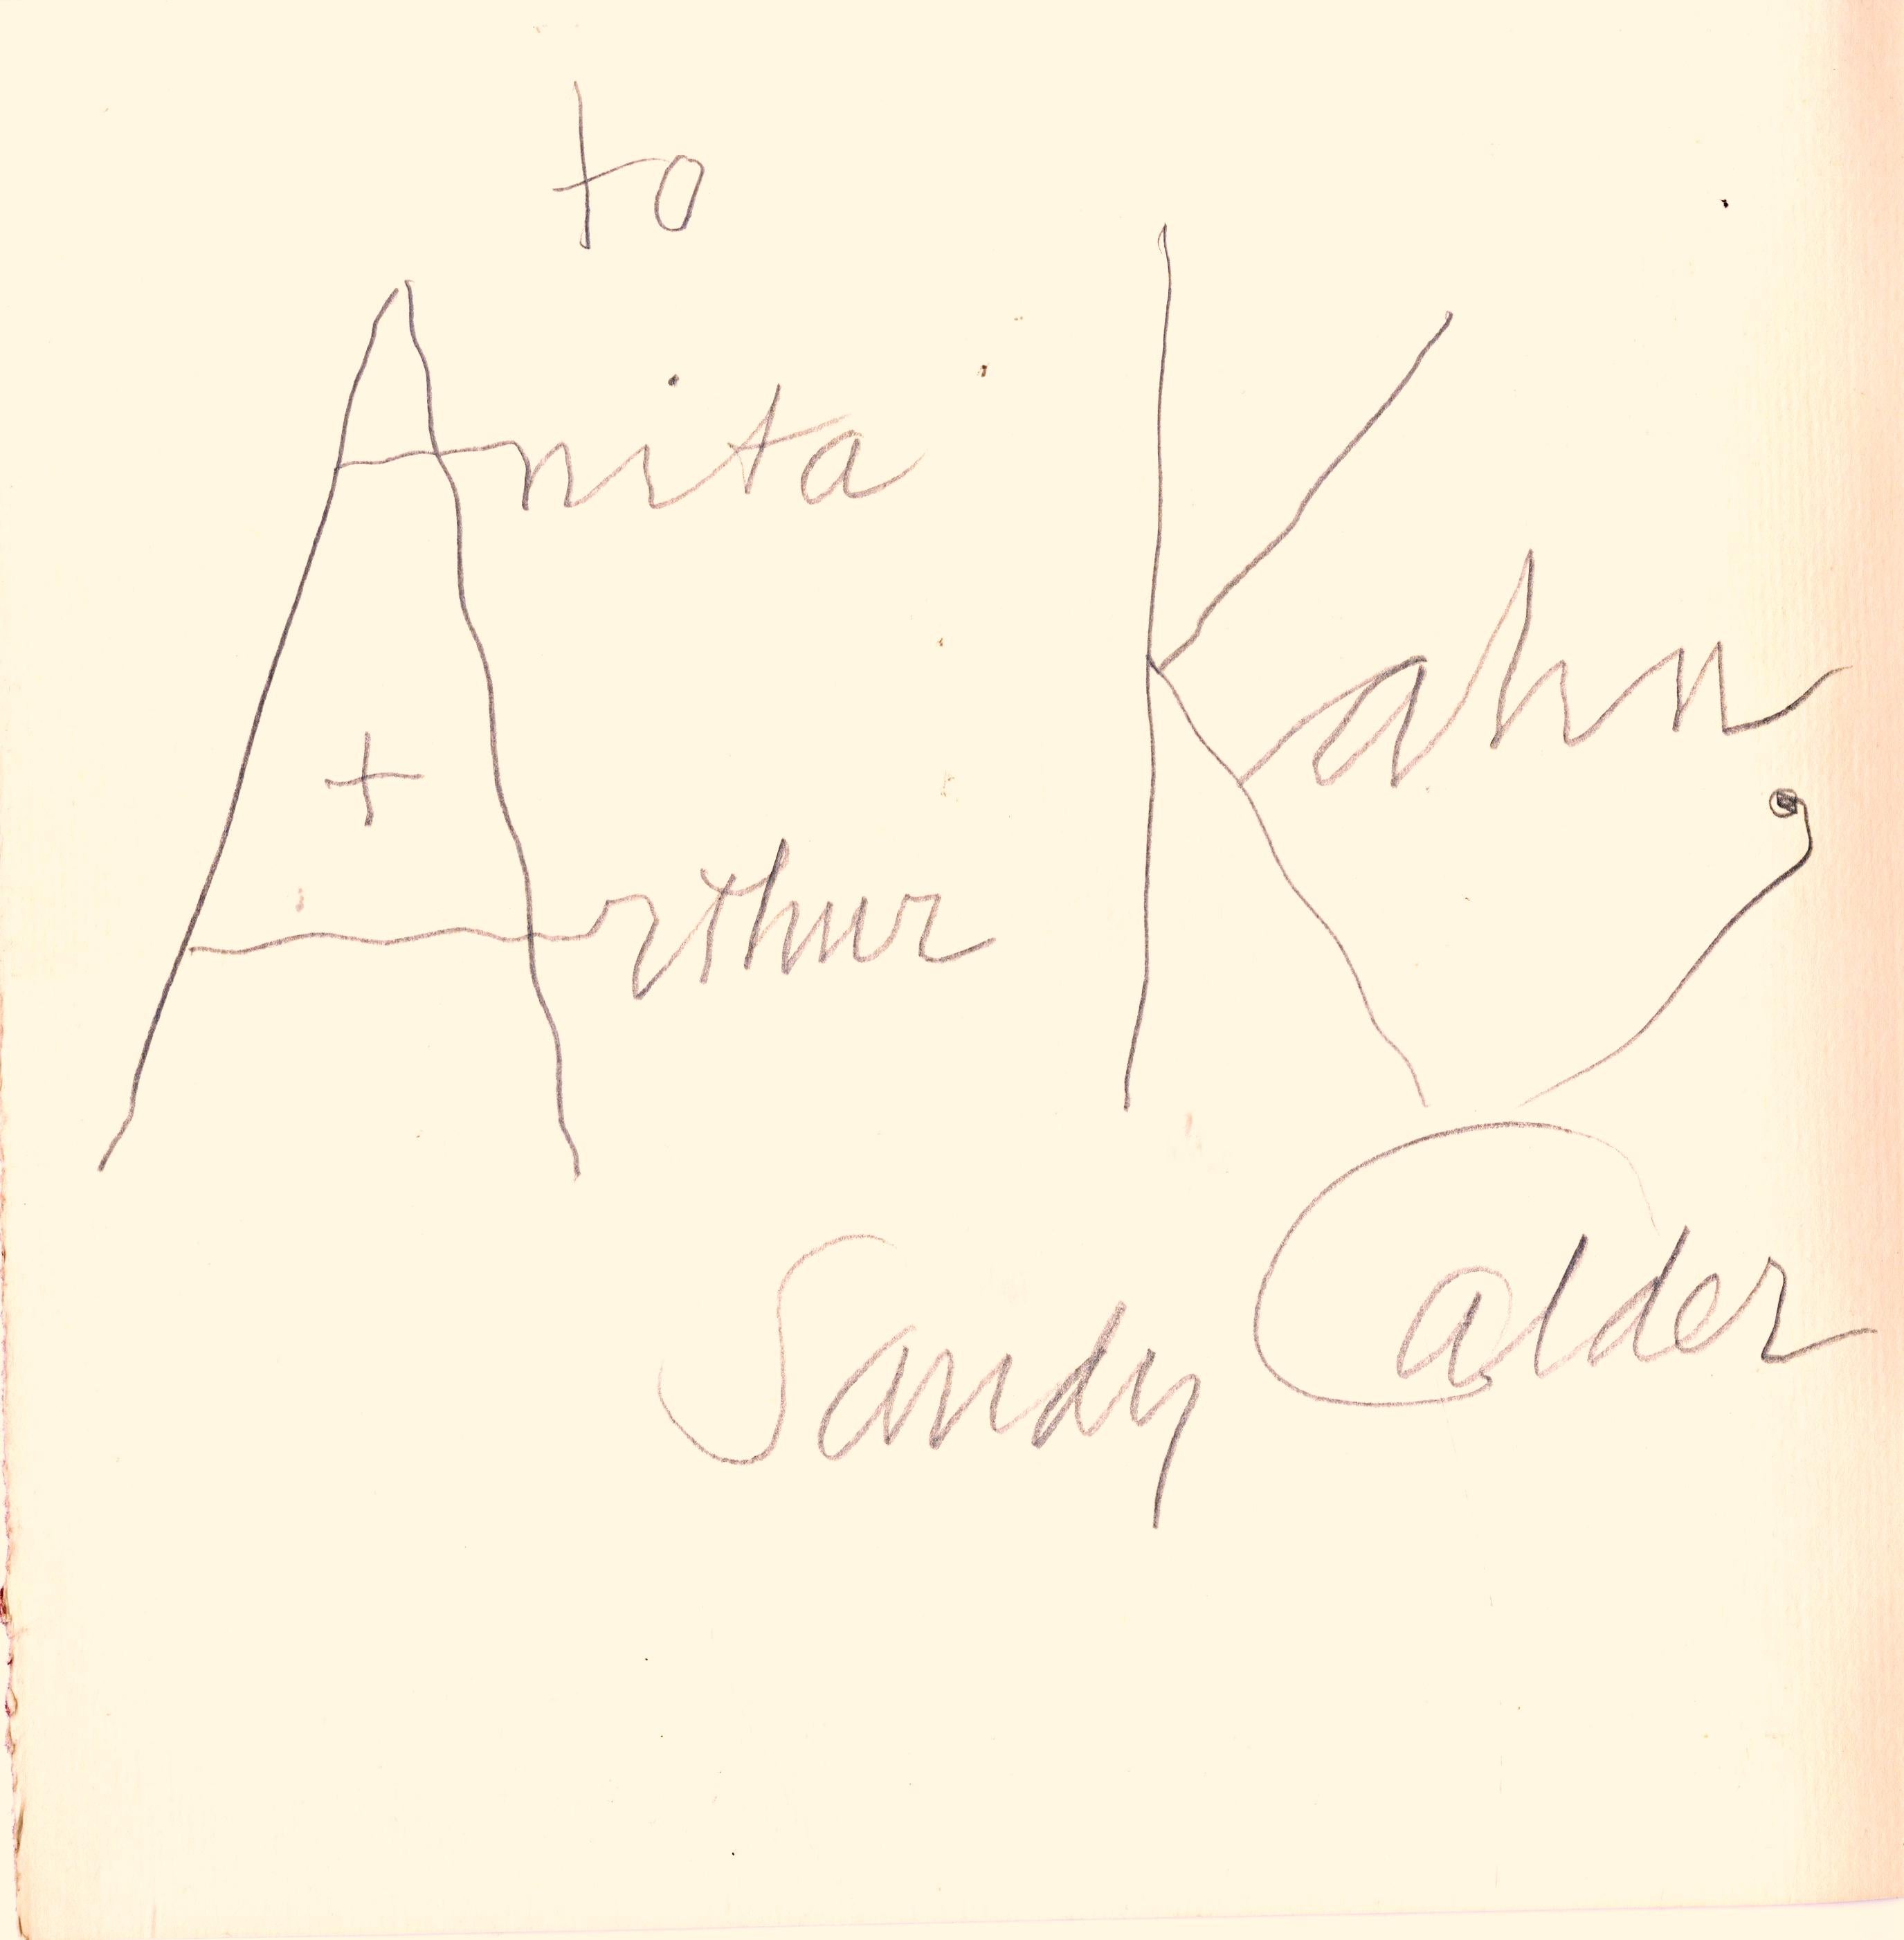 Perls Galleries exhibition catalogue Hand signed & Inscribed by Alexander Calder 1